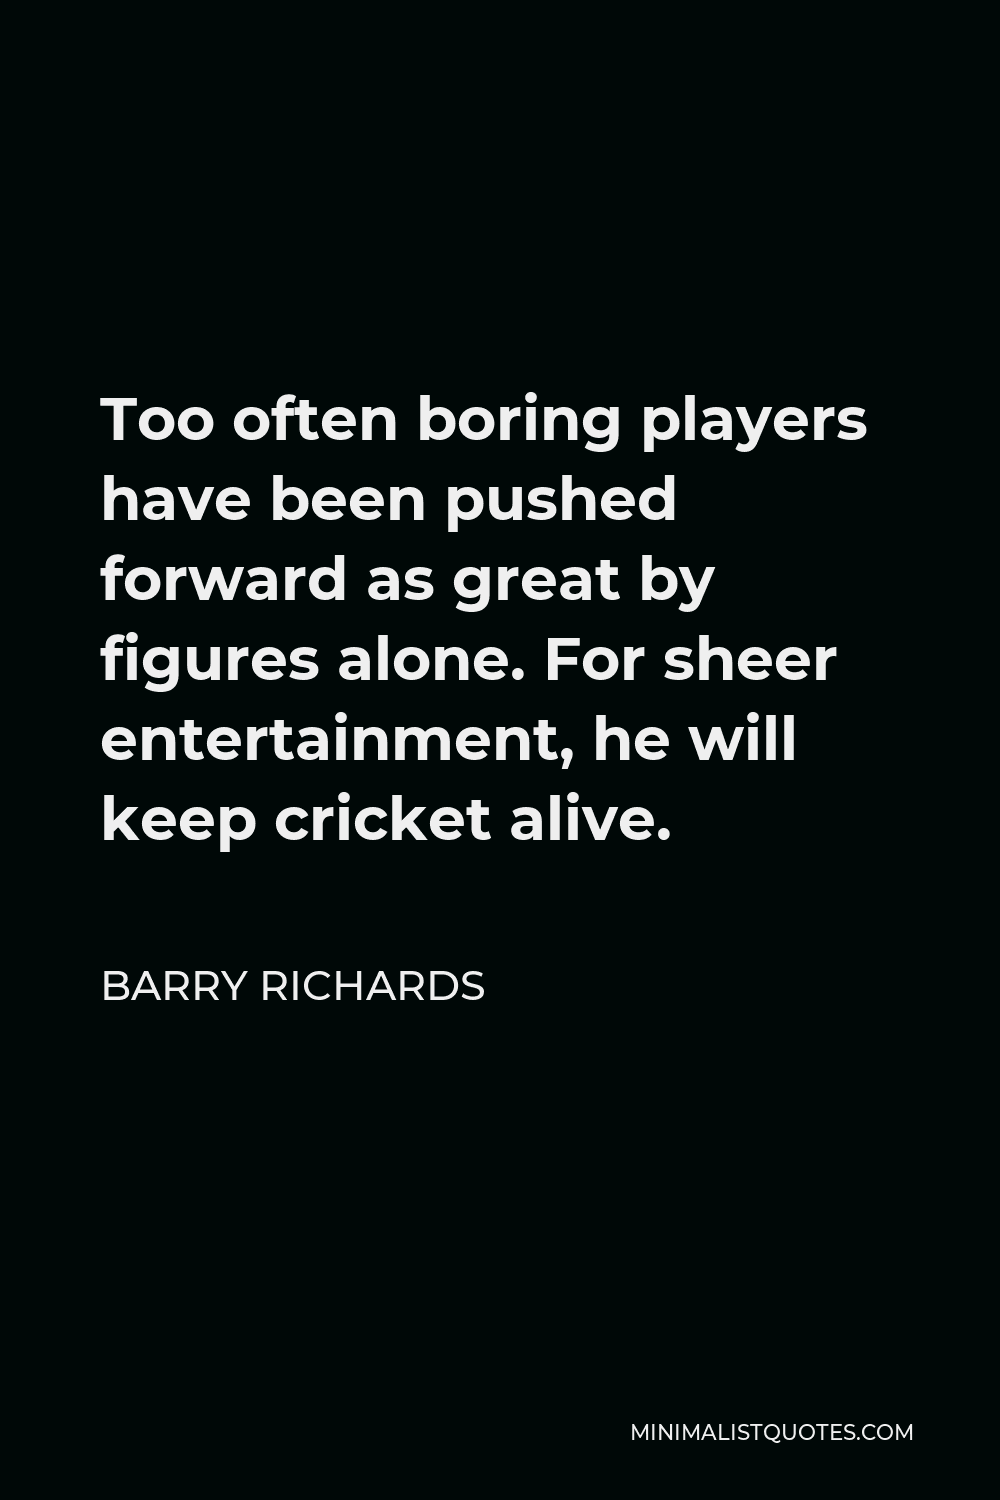 Barry Richards Quote - Too often boring players have been pushed forward as great by figures alone. For sheer entertainment, he will keep cricket alive.